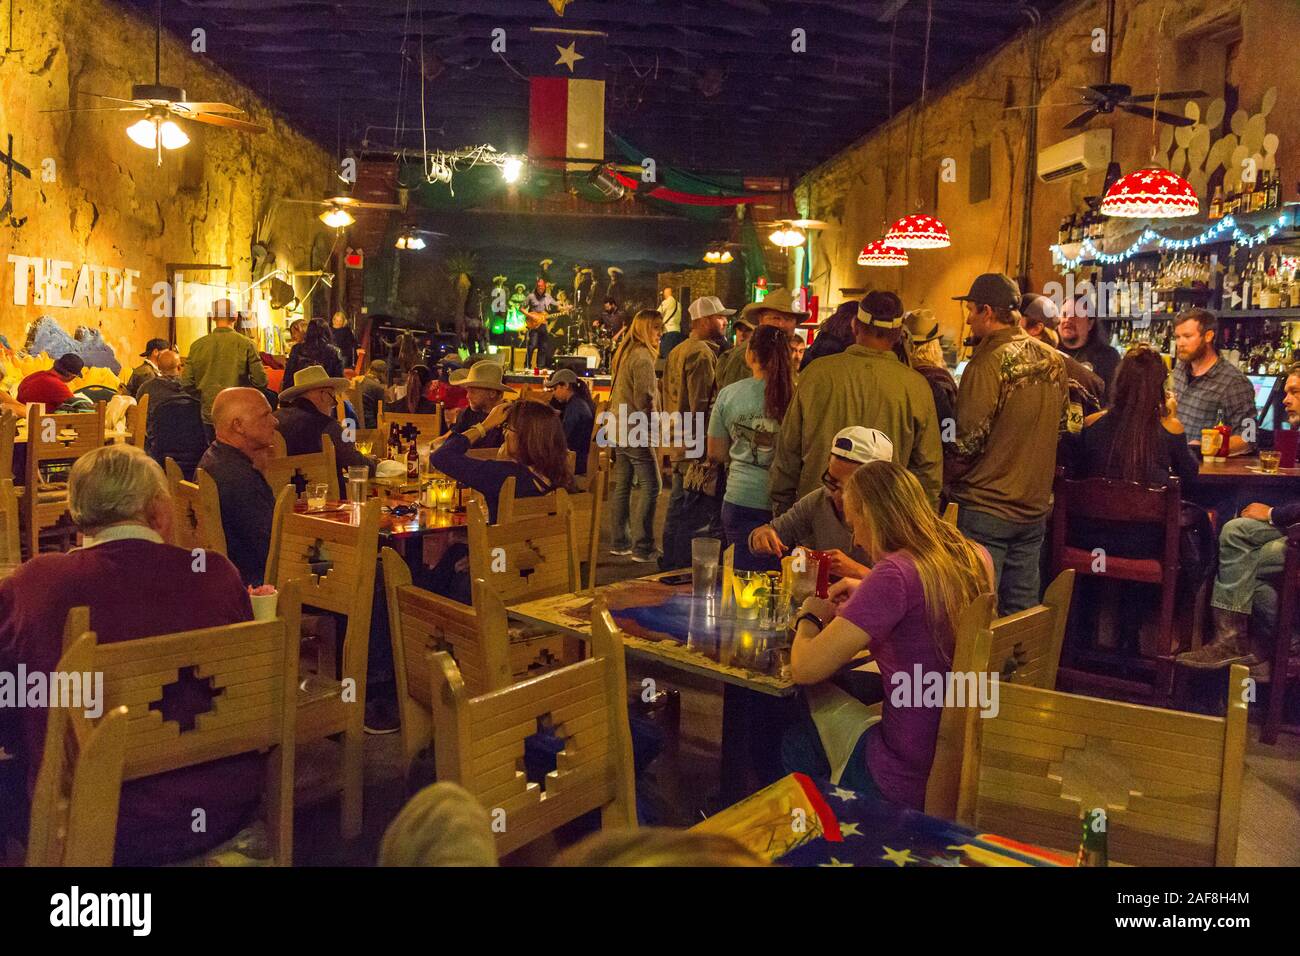 Terlingua, Texas.  Patrons at Terlingua Theater, Restaurant, and Bar. Stock Photo